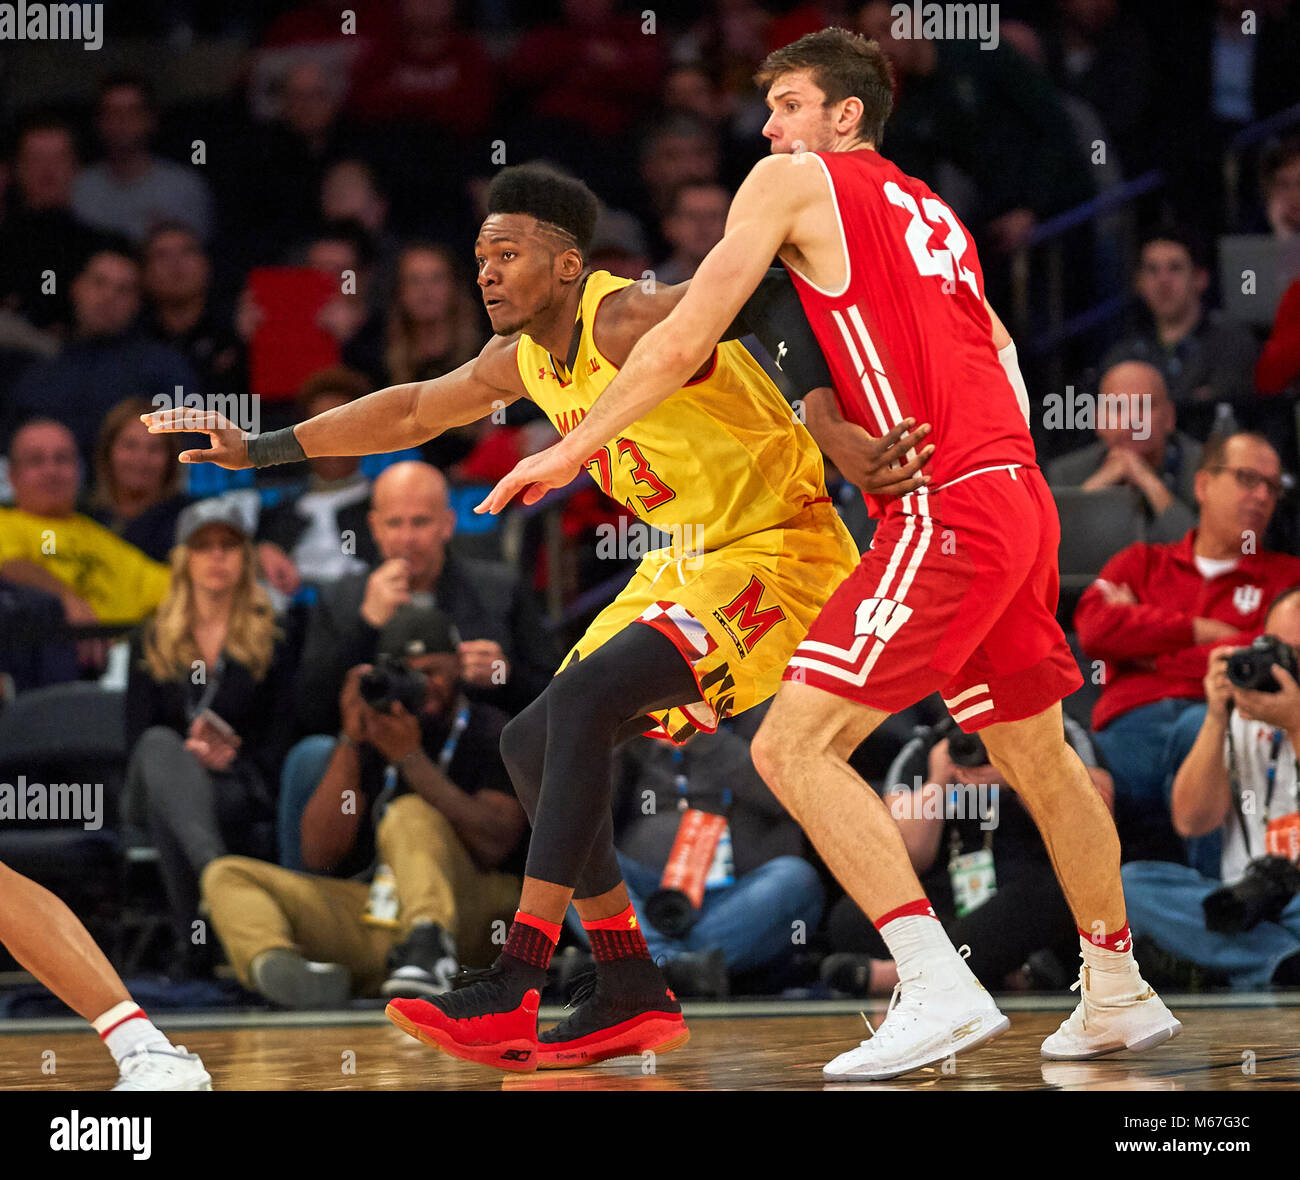 New York, New York, USA. 1st Mar, 2018. Maryland Terrapins forward Bruno Fernando (23) tries to get the low post against Wisconsin Badgers forward Ethan Happ (22) in the first half during the second round of Big Ten Conference Tournament play at Madison Square Garden in New York City. Duncan Williams/CSM/Alamy Live News Stock Photo